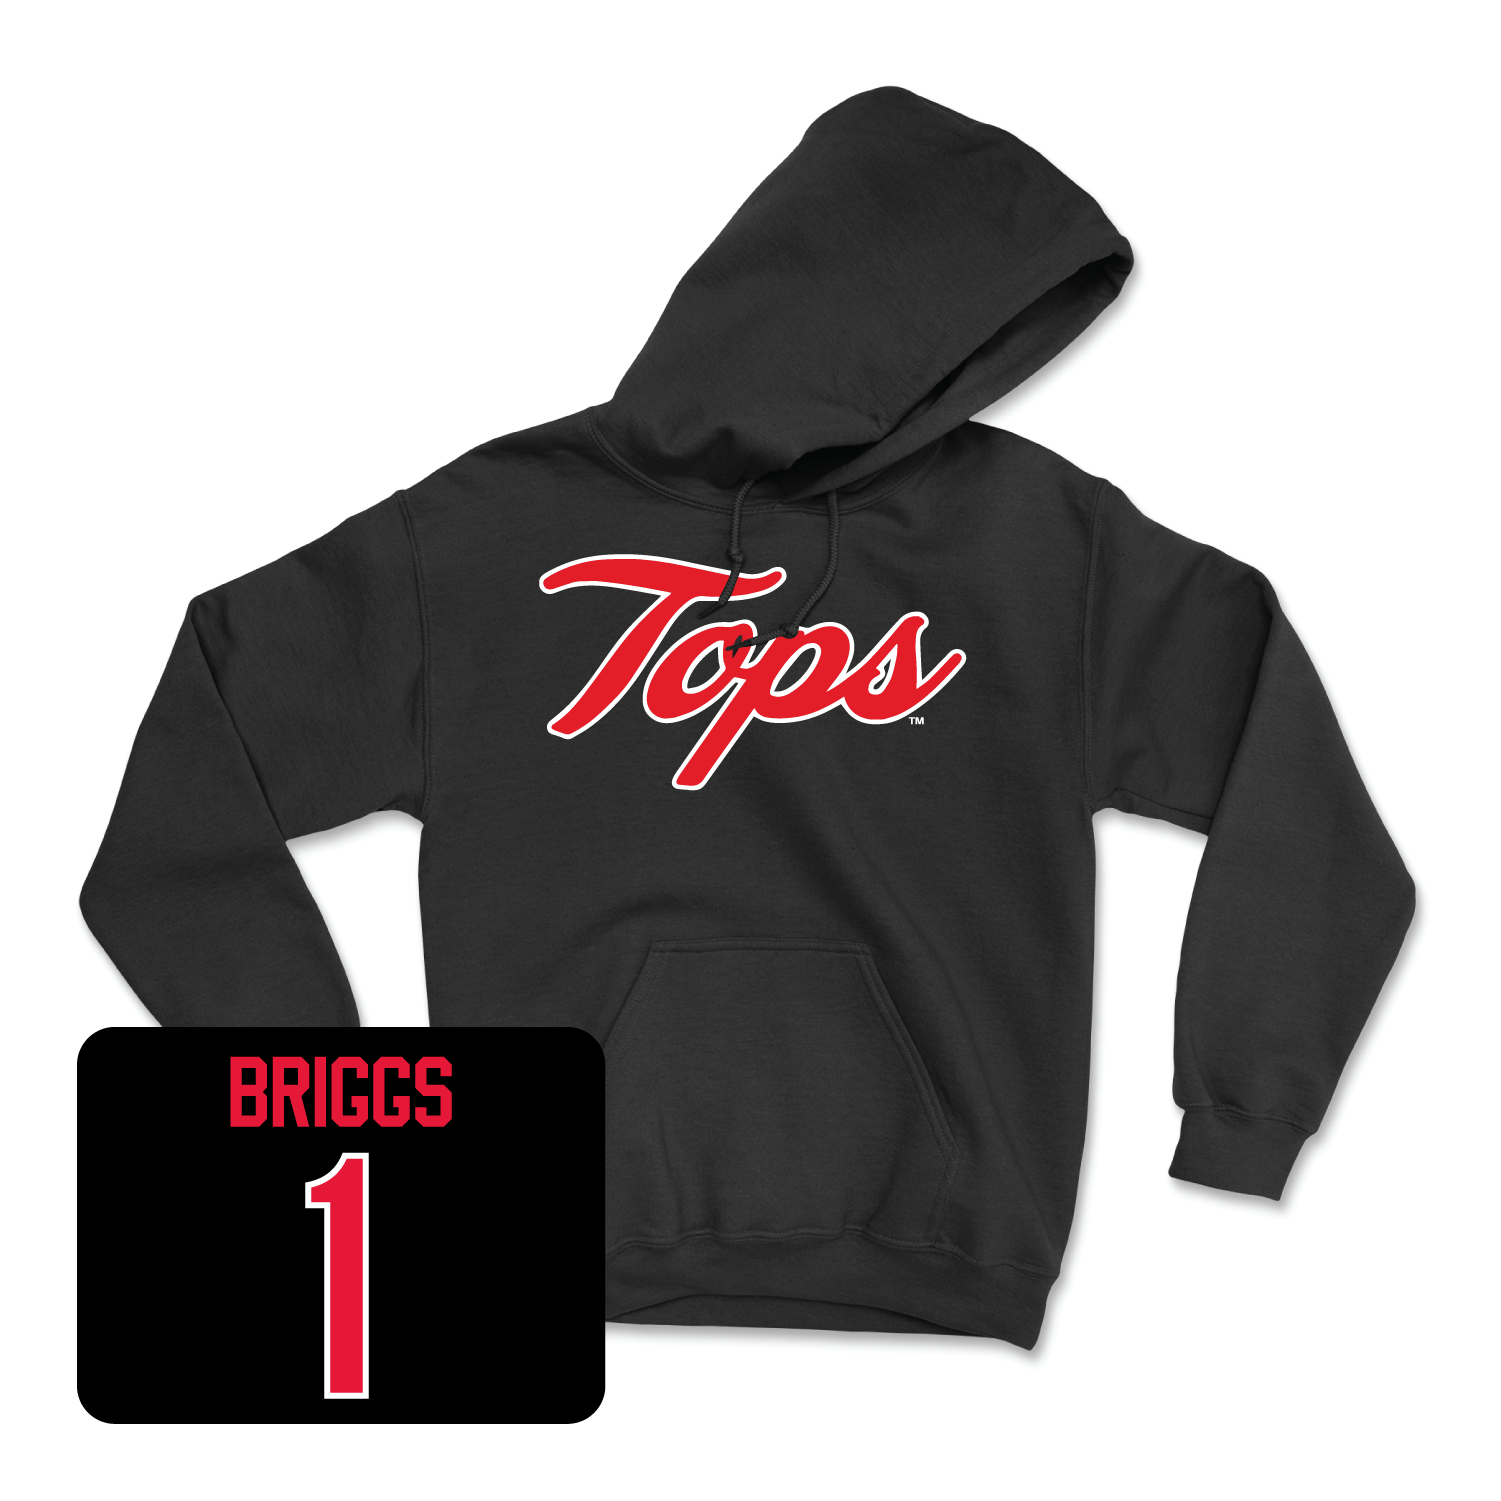 Black Women's Volleyball Tops Hoodie Large / Paige Briggs | #1